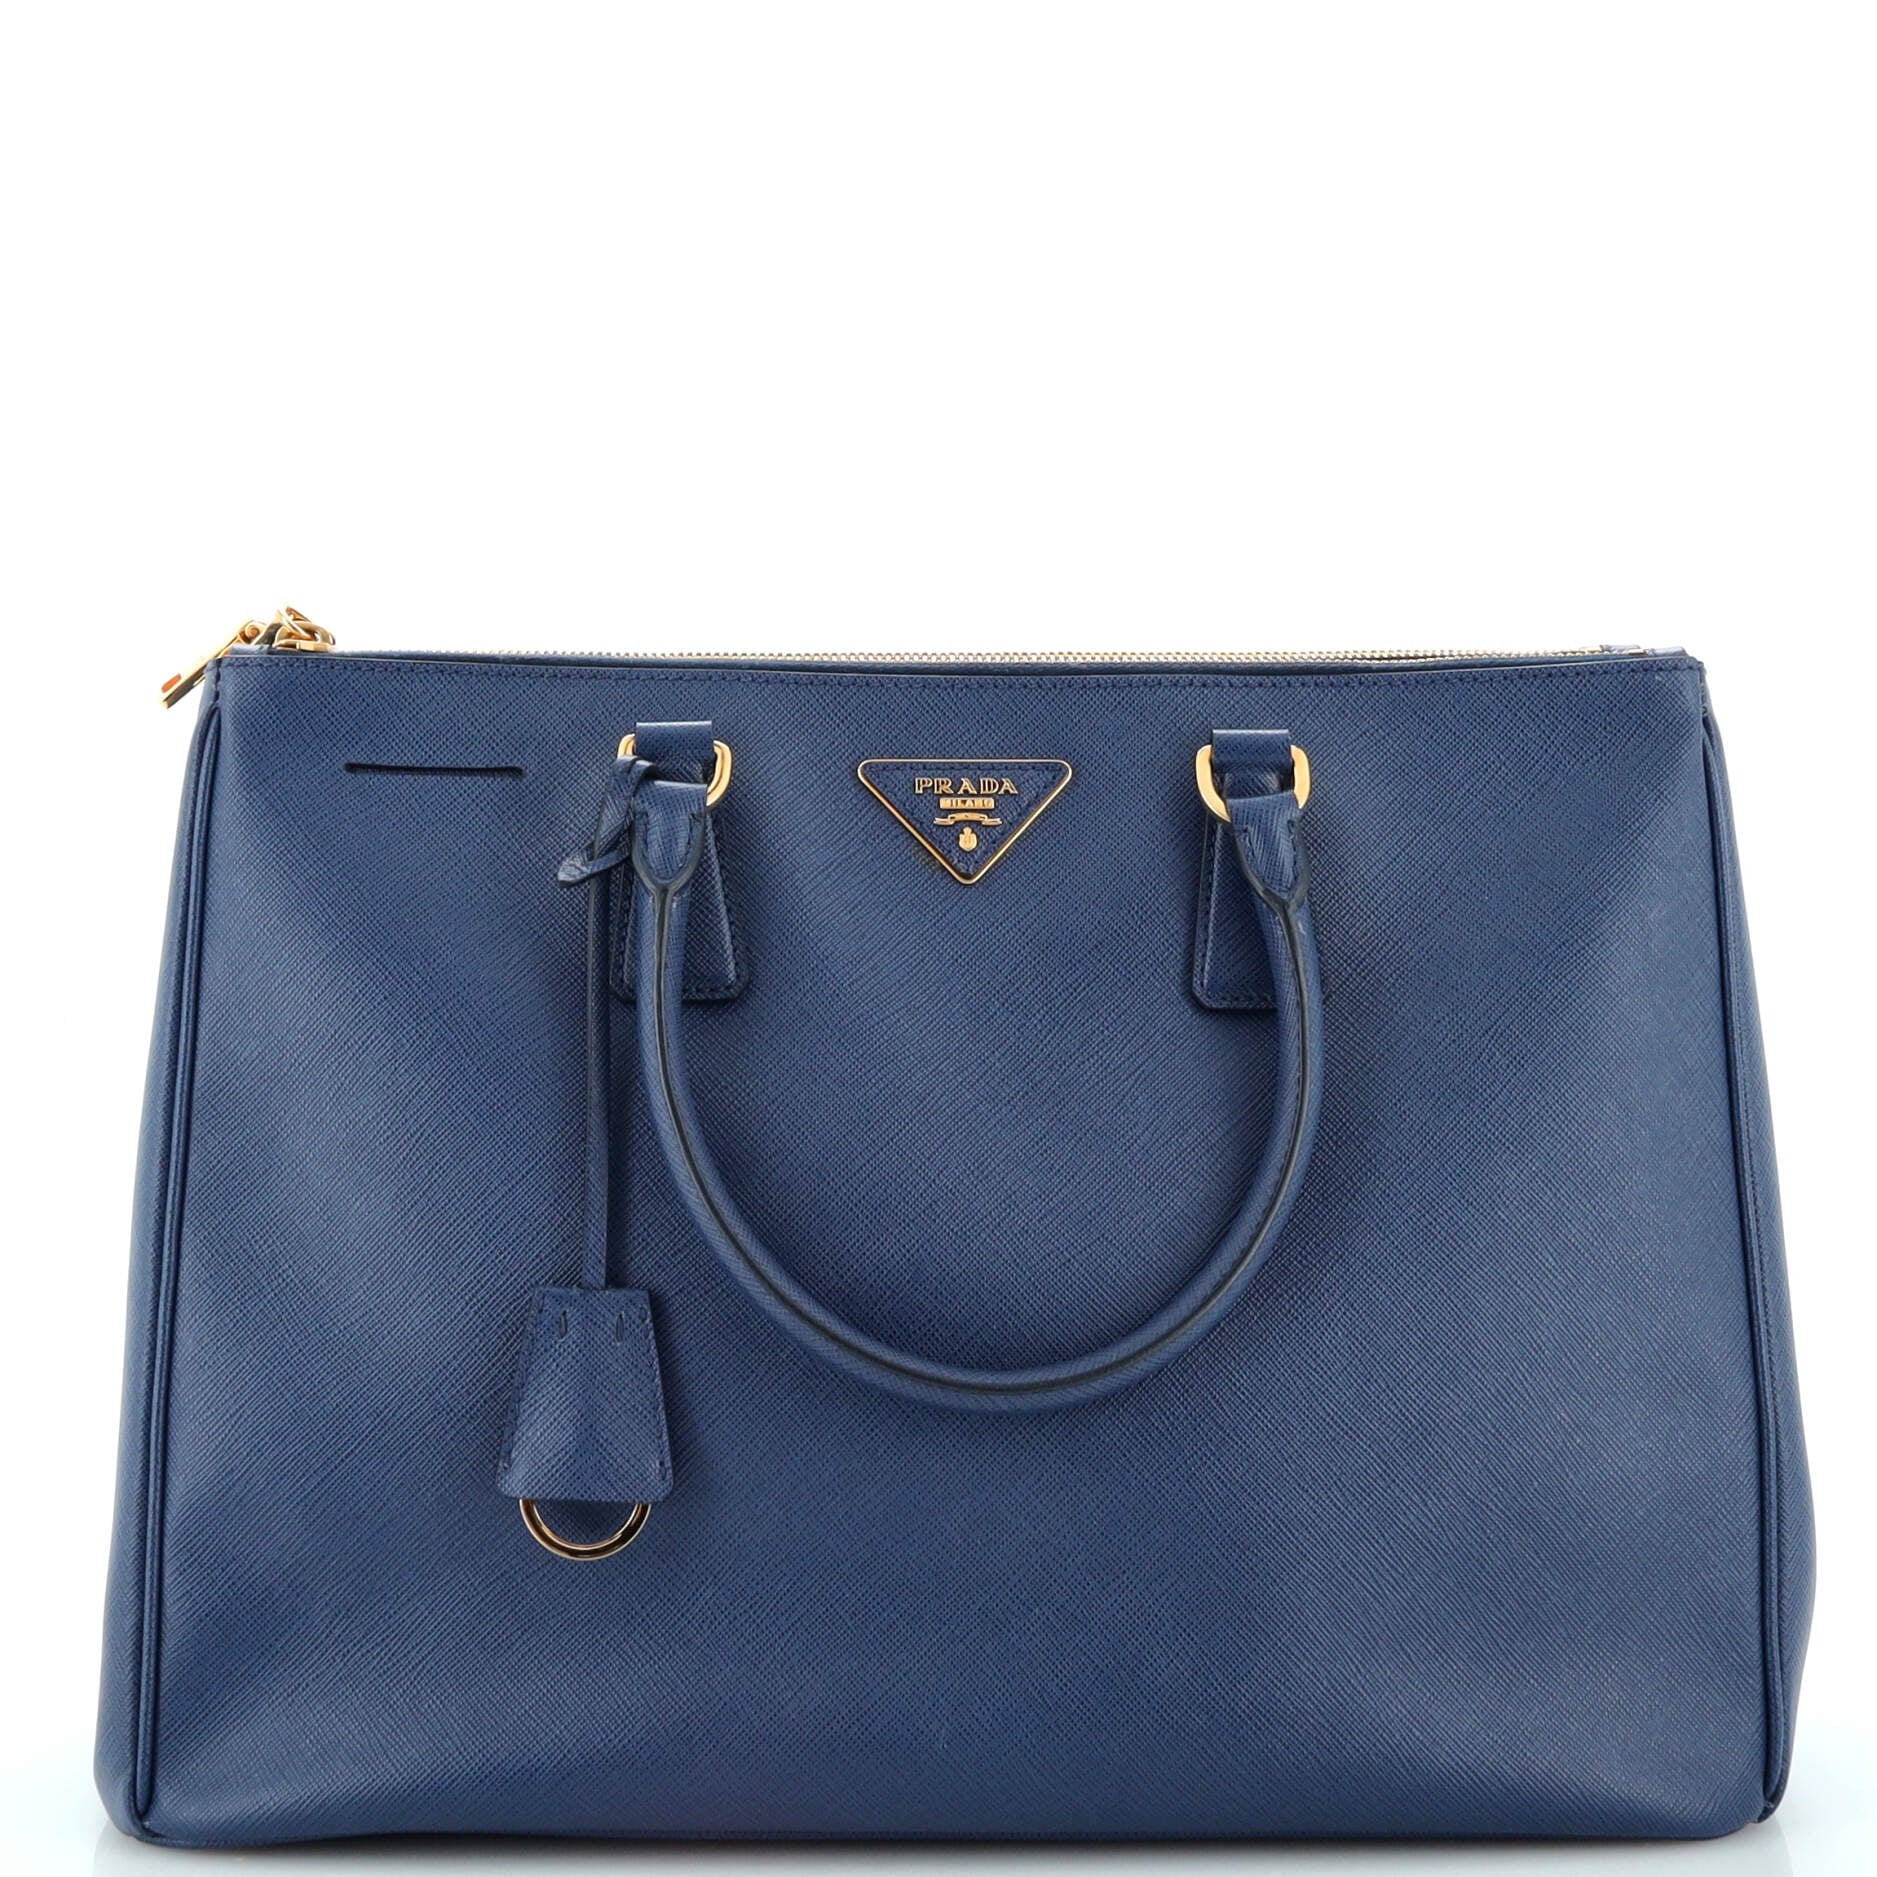 prada terry tote bag blue with bag new with no tags retail $1820